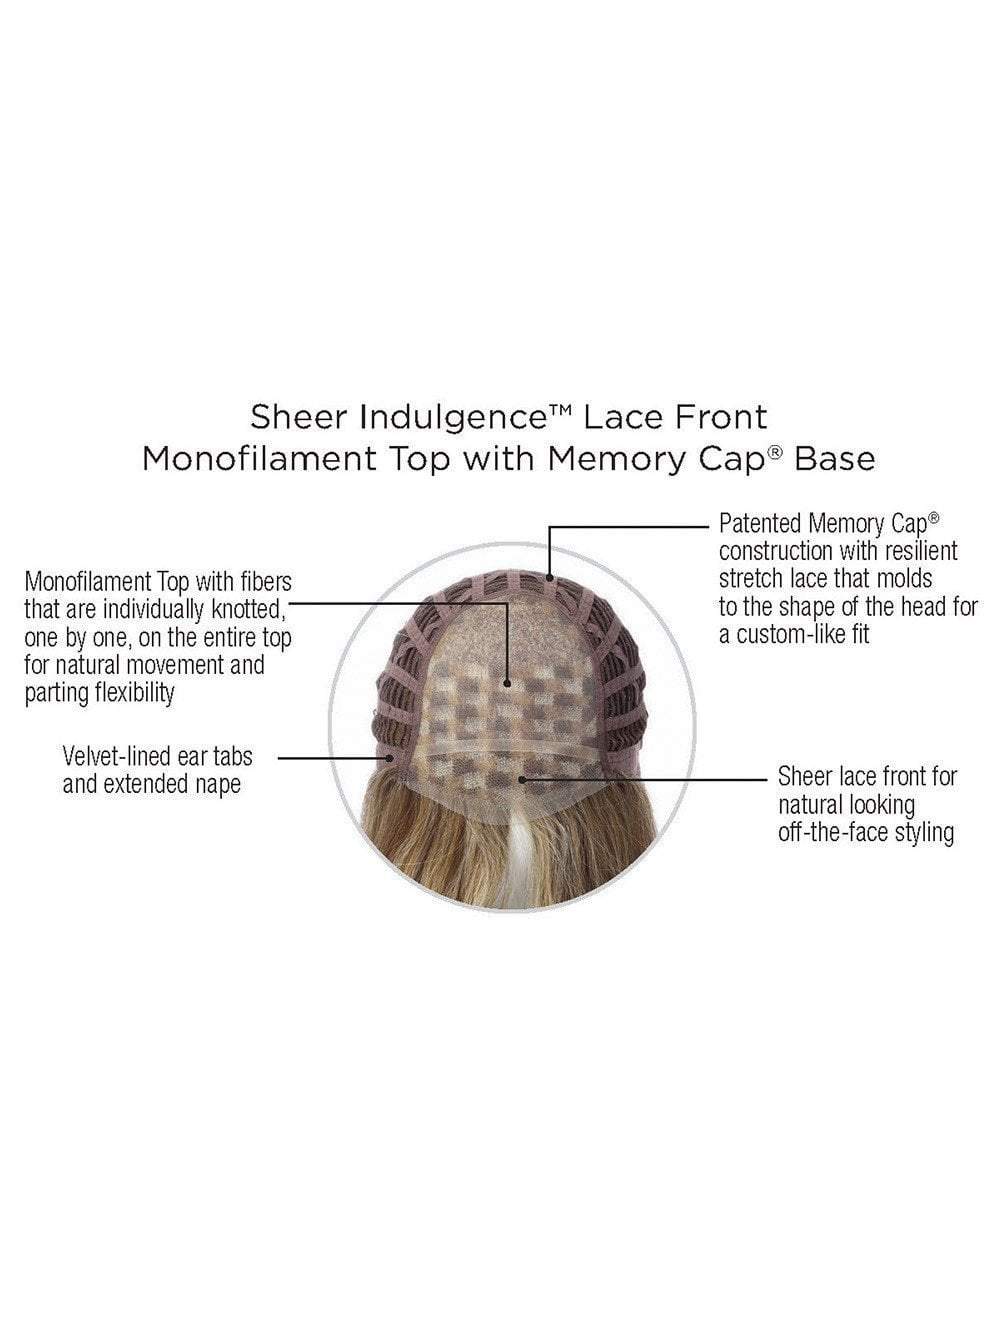 Lace Front & Monofilament Top | see Cap Construction Chart & Video for details